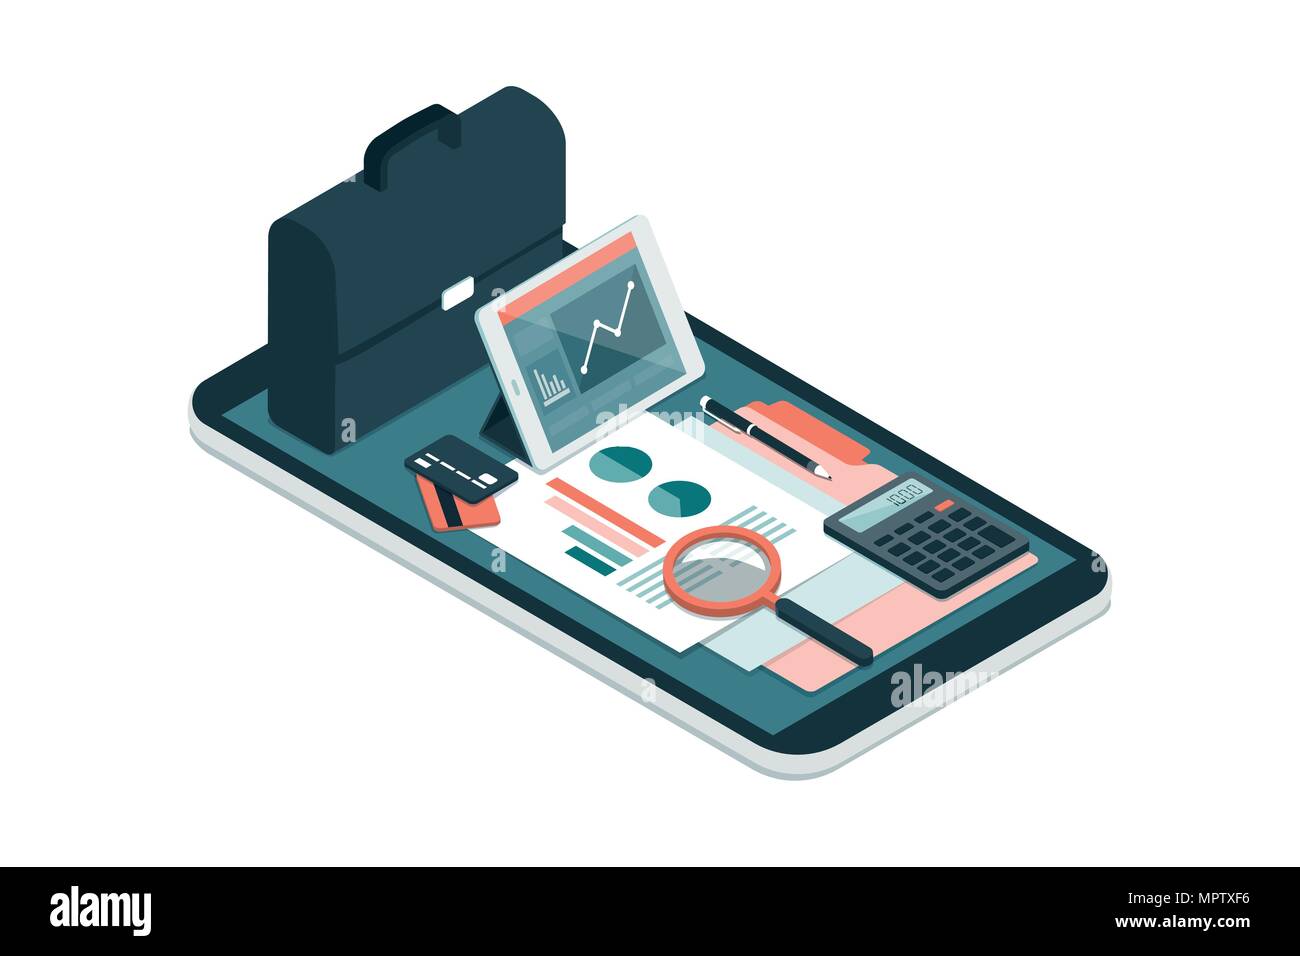 Business and finance management app for enterprises, business equipment and icons on a smartphone Stock Vector